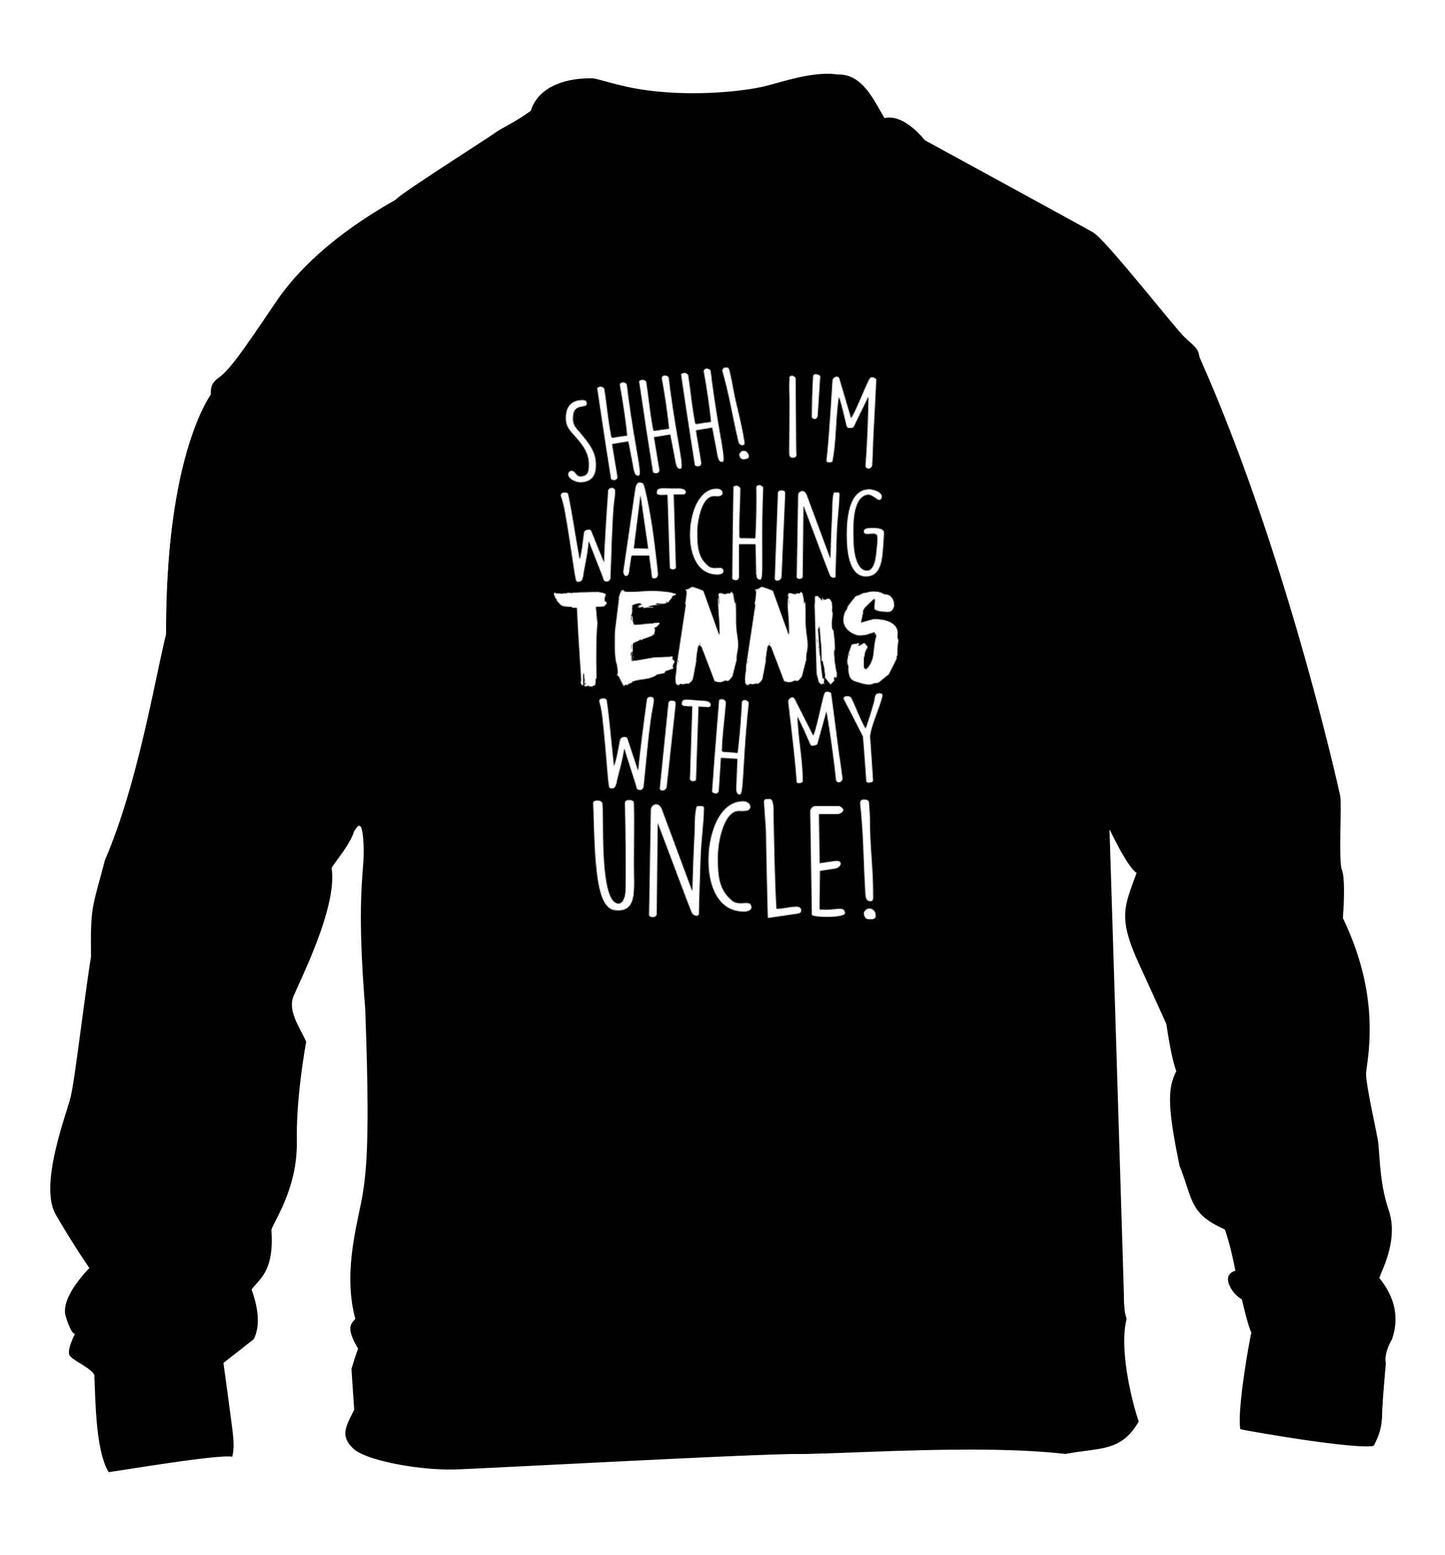 Shh! I'm watching tennis with my uncle! children's black sweater 12-13 Years